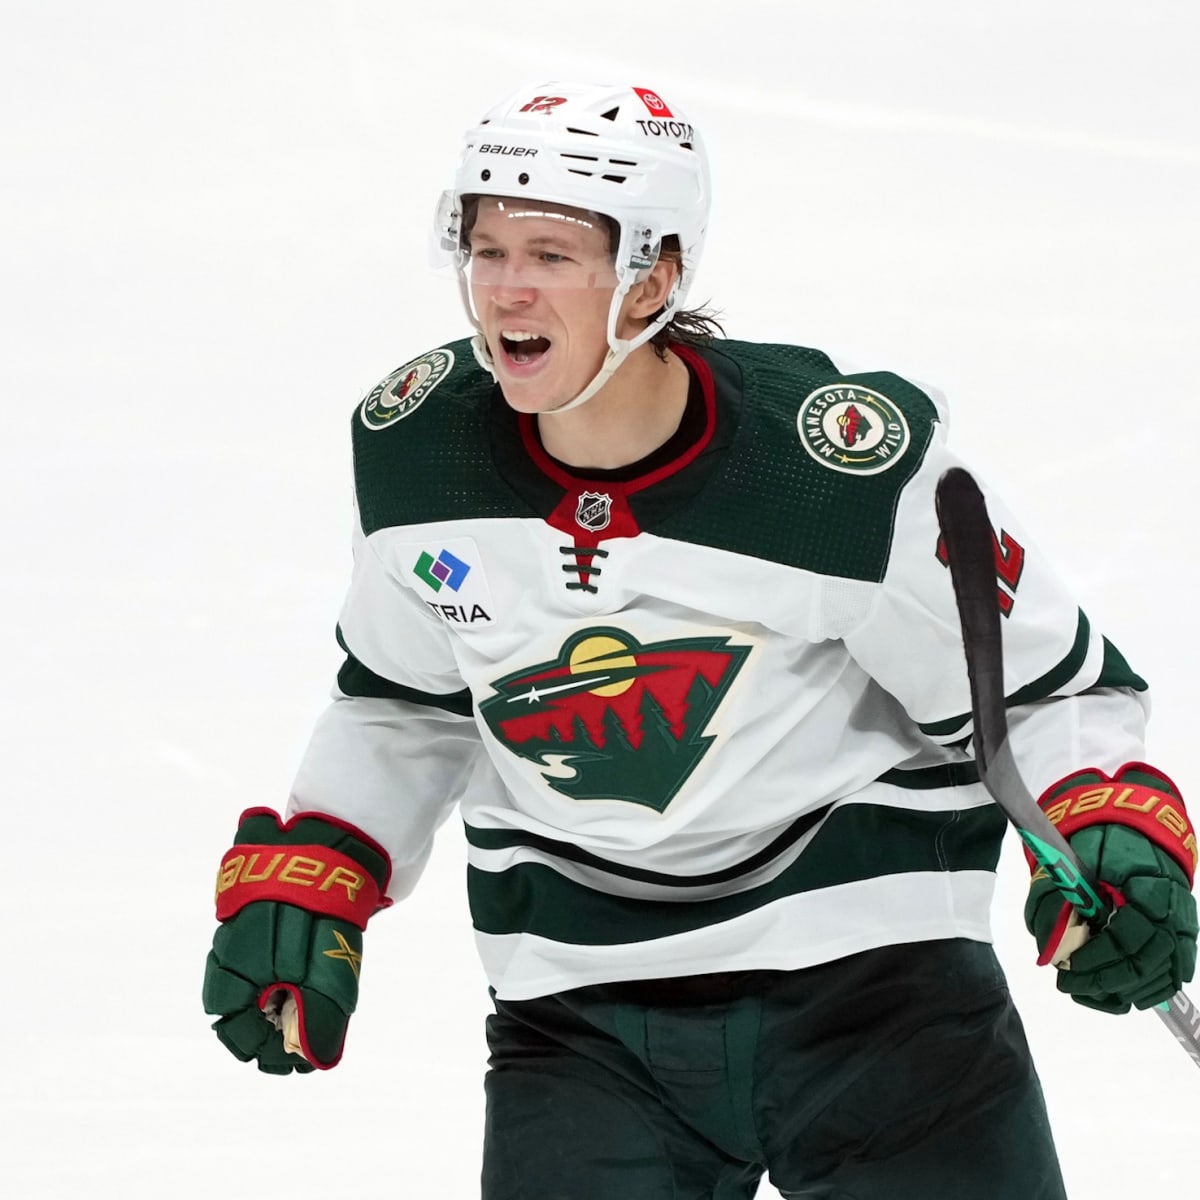 Boldy's goal with 1.3 left in OT lifts Wild over Devils - NBC Sports